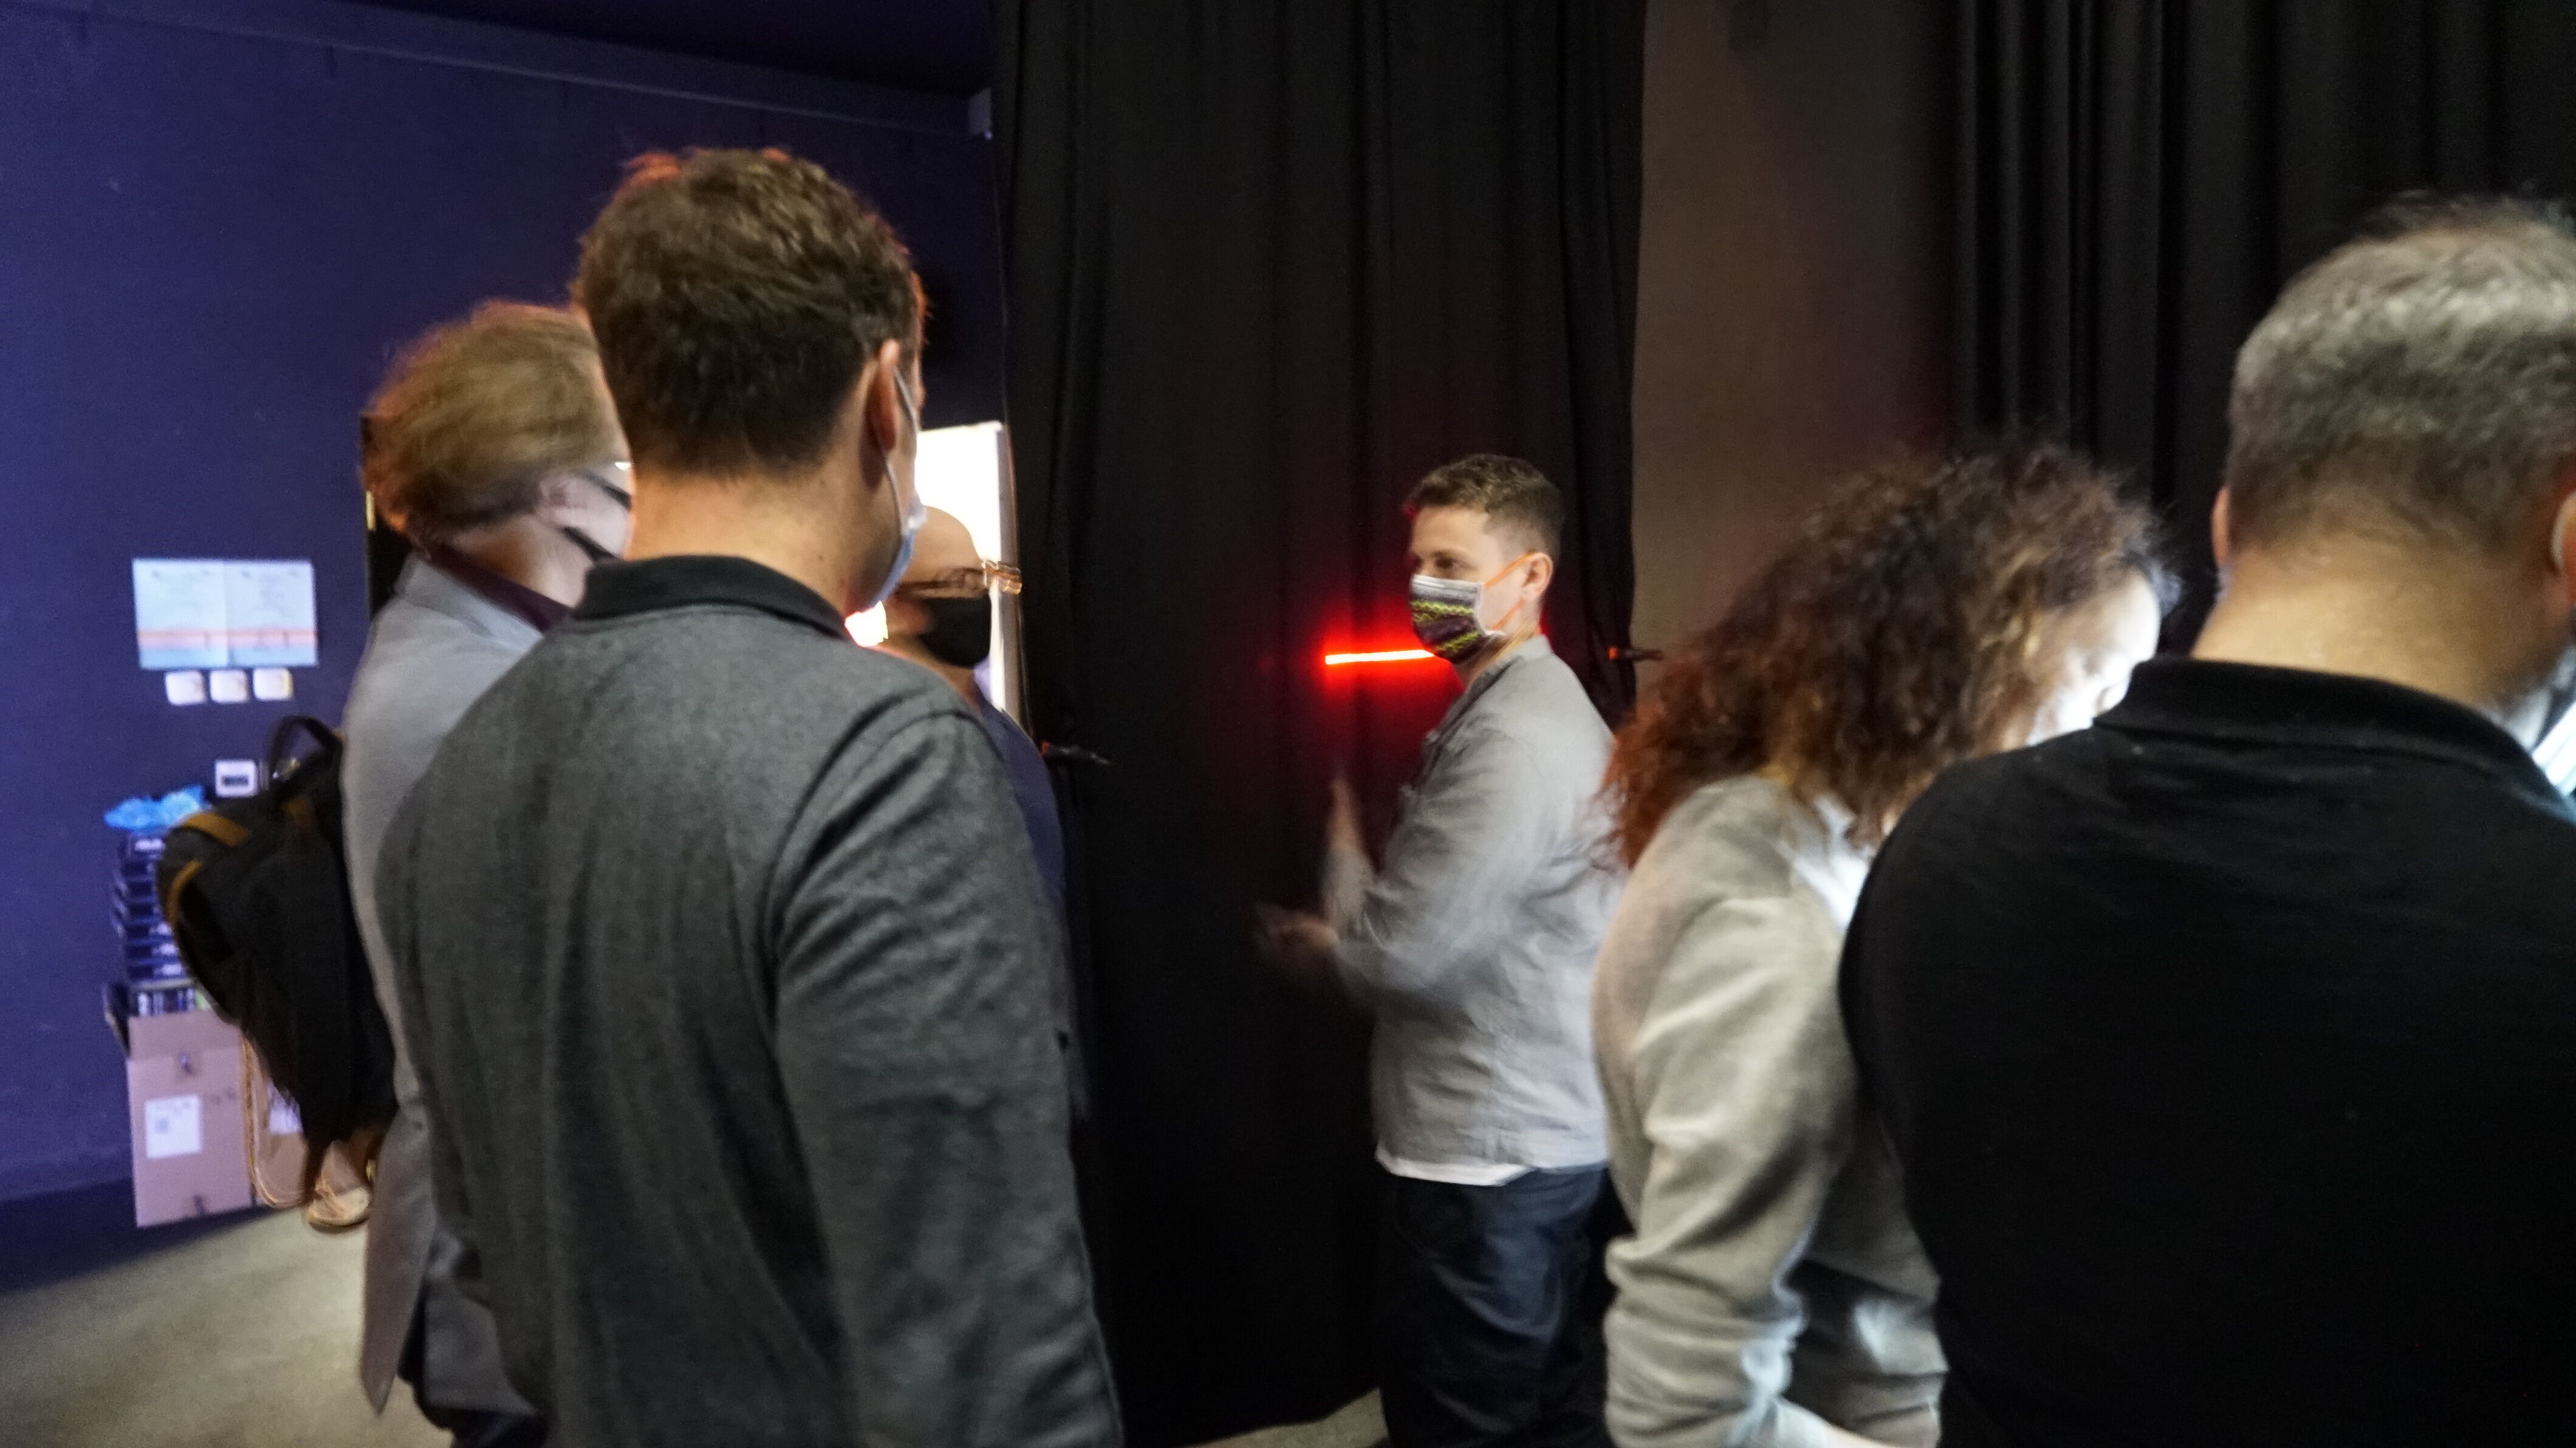 Jayson Haebich shows his demo Interactive Minimal latency Laser Graphics to guests.